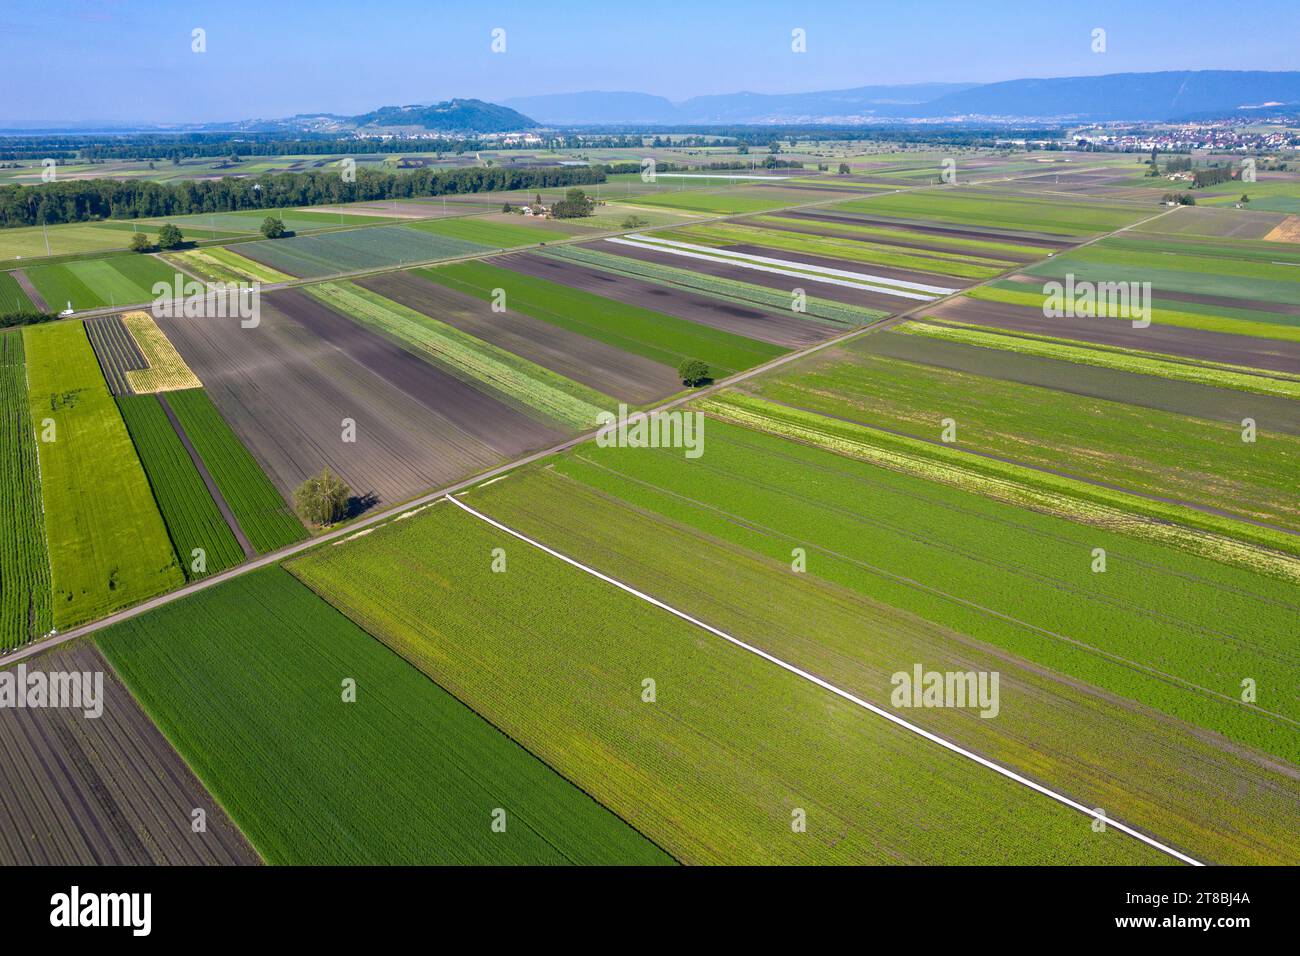 Cropland for the cultivation of vegetables in the vegetable growing area Seeland - Grosse Moos, Kerzers, canton of Fribourg, Switzerland Stock Photo